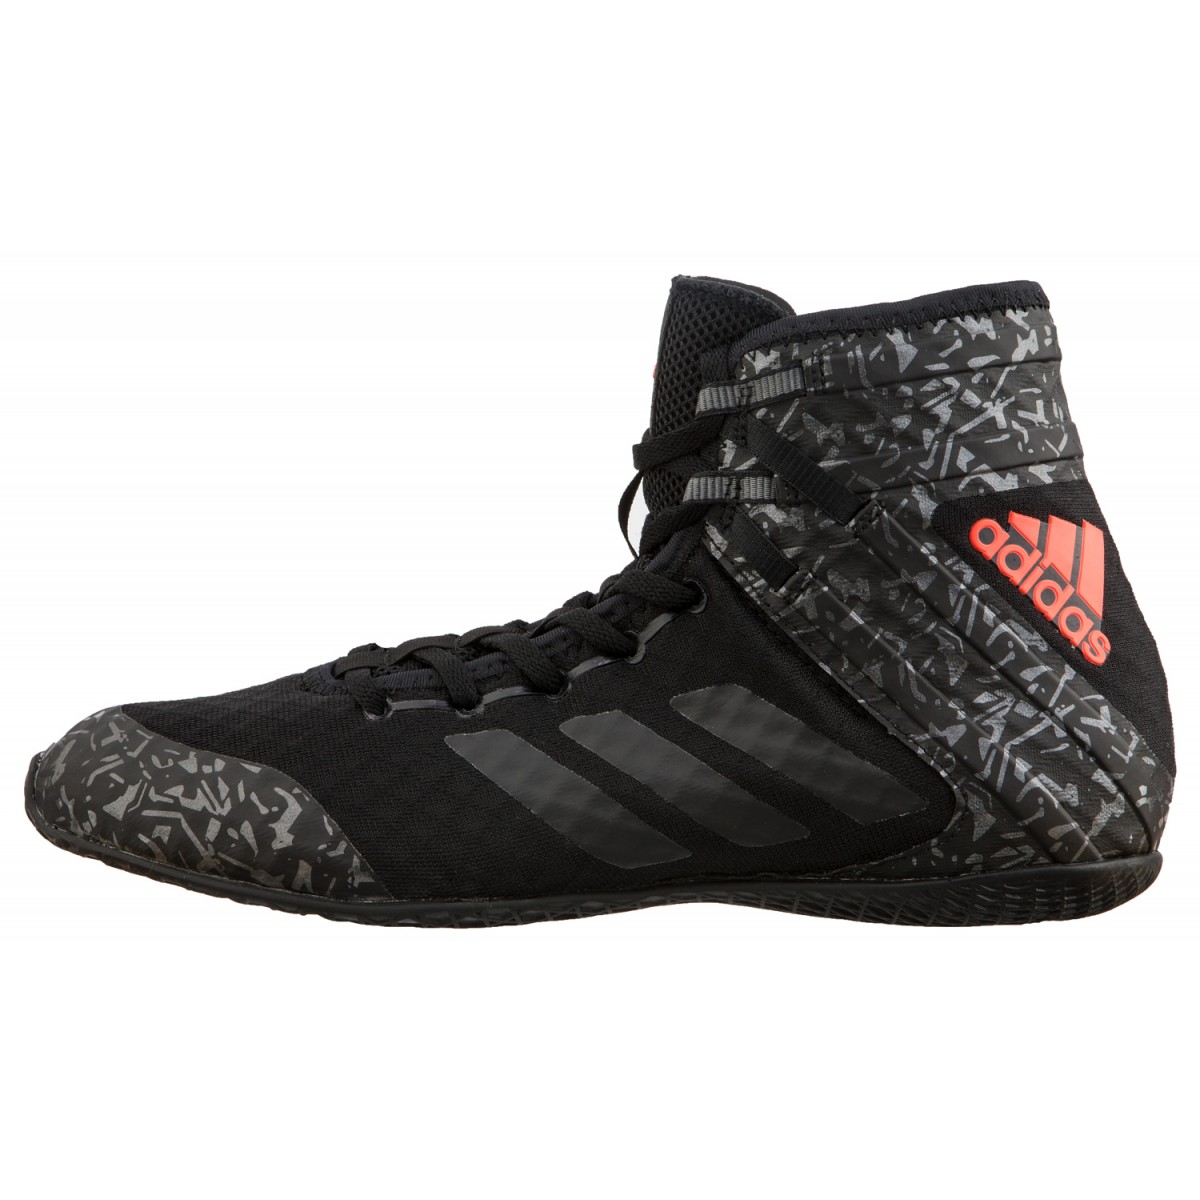 Women's Speedex Limited Edition Adidas Mid Boxing Shoes